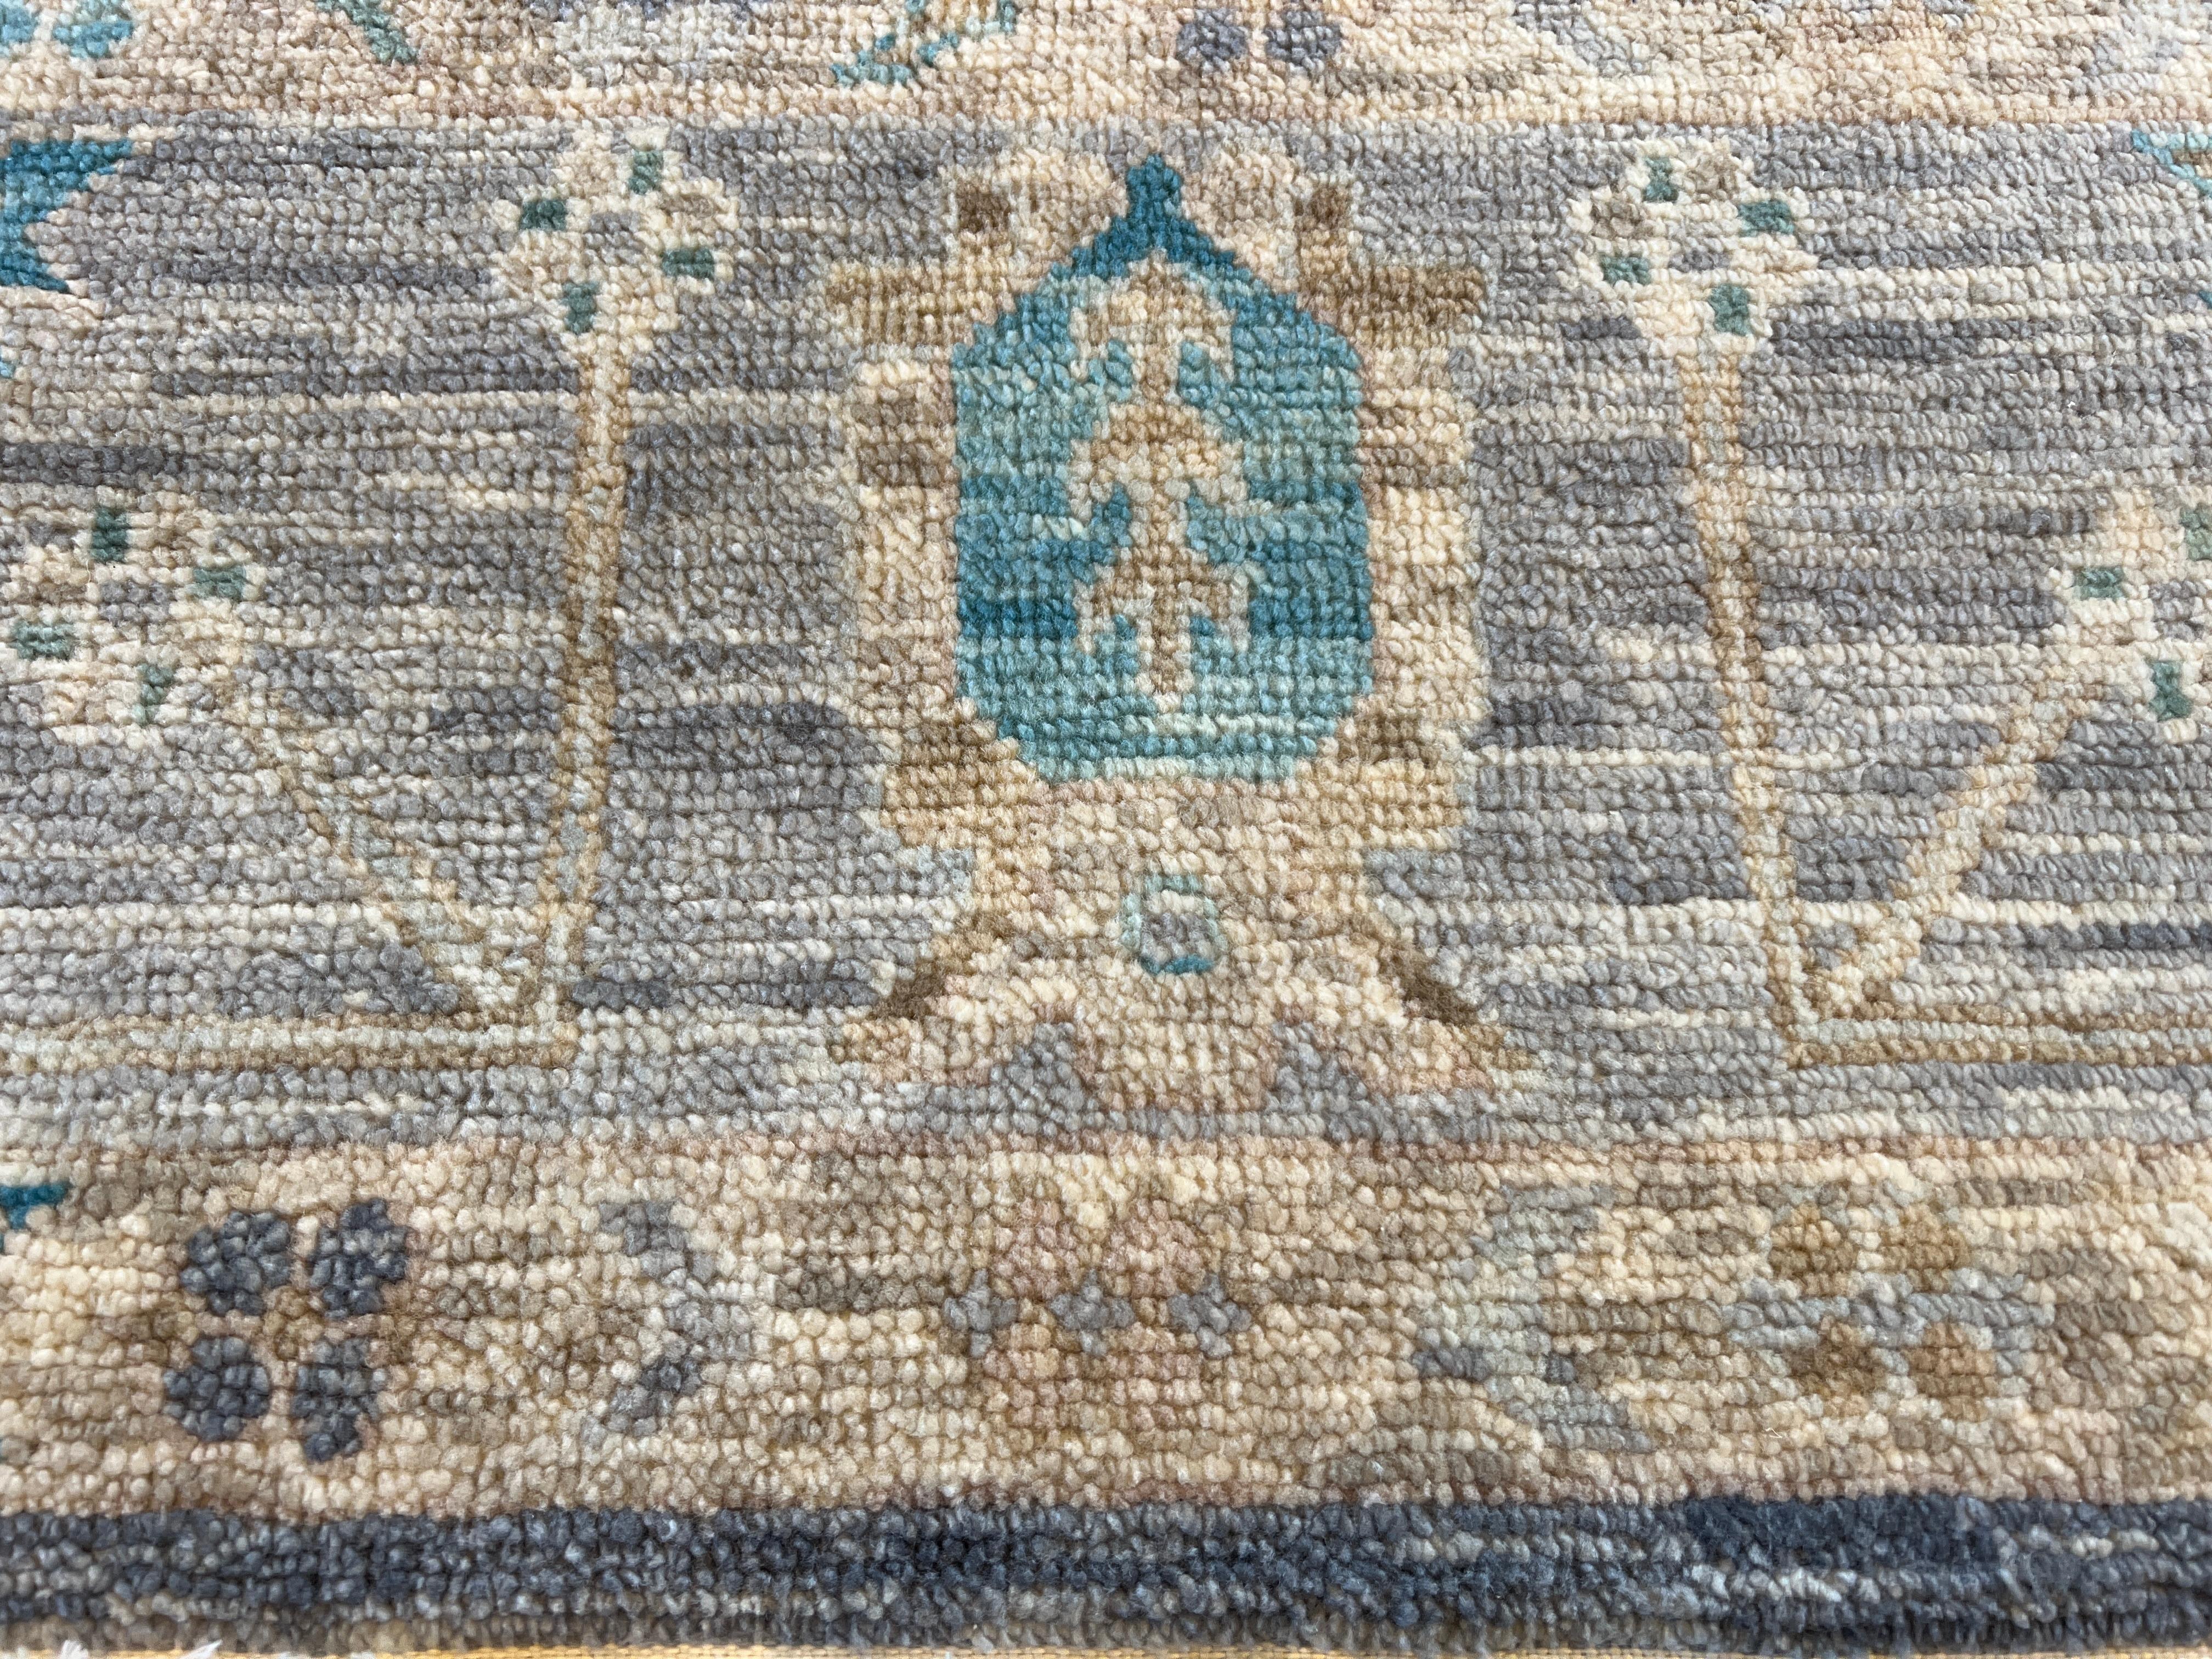 Elevate your space with our 9'x12' Persian design grey ivory all wool hand-knotted rug made in India. Featuring a great transitional design, this rug adds style and luxurious comfort to any room. Made with high-quality wool, it's easy to clean,